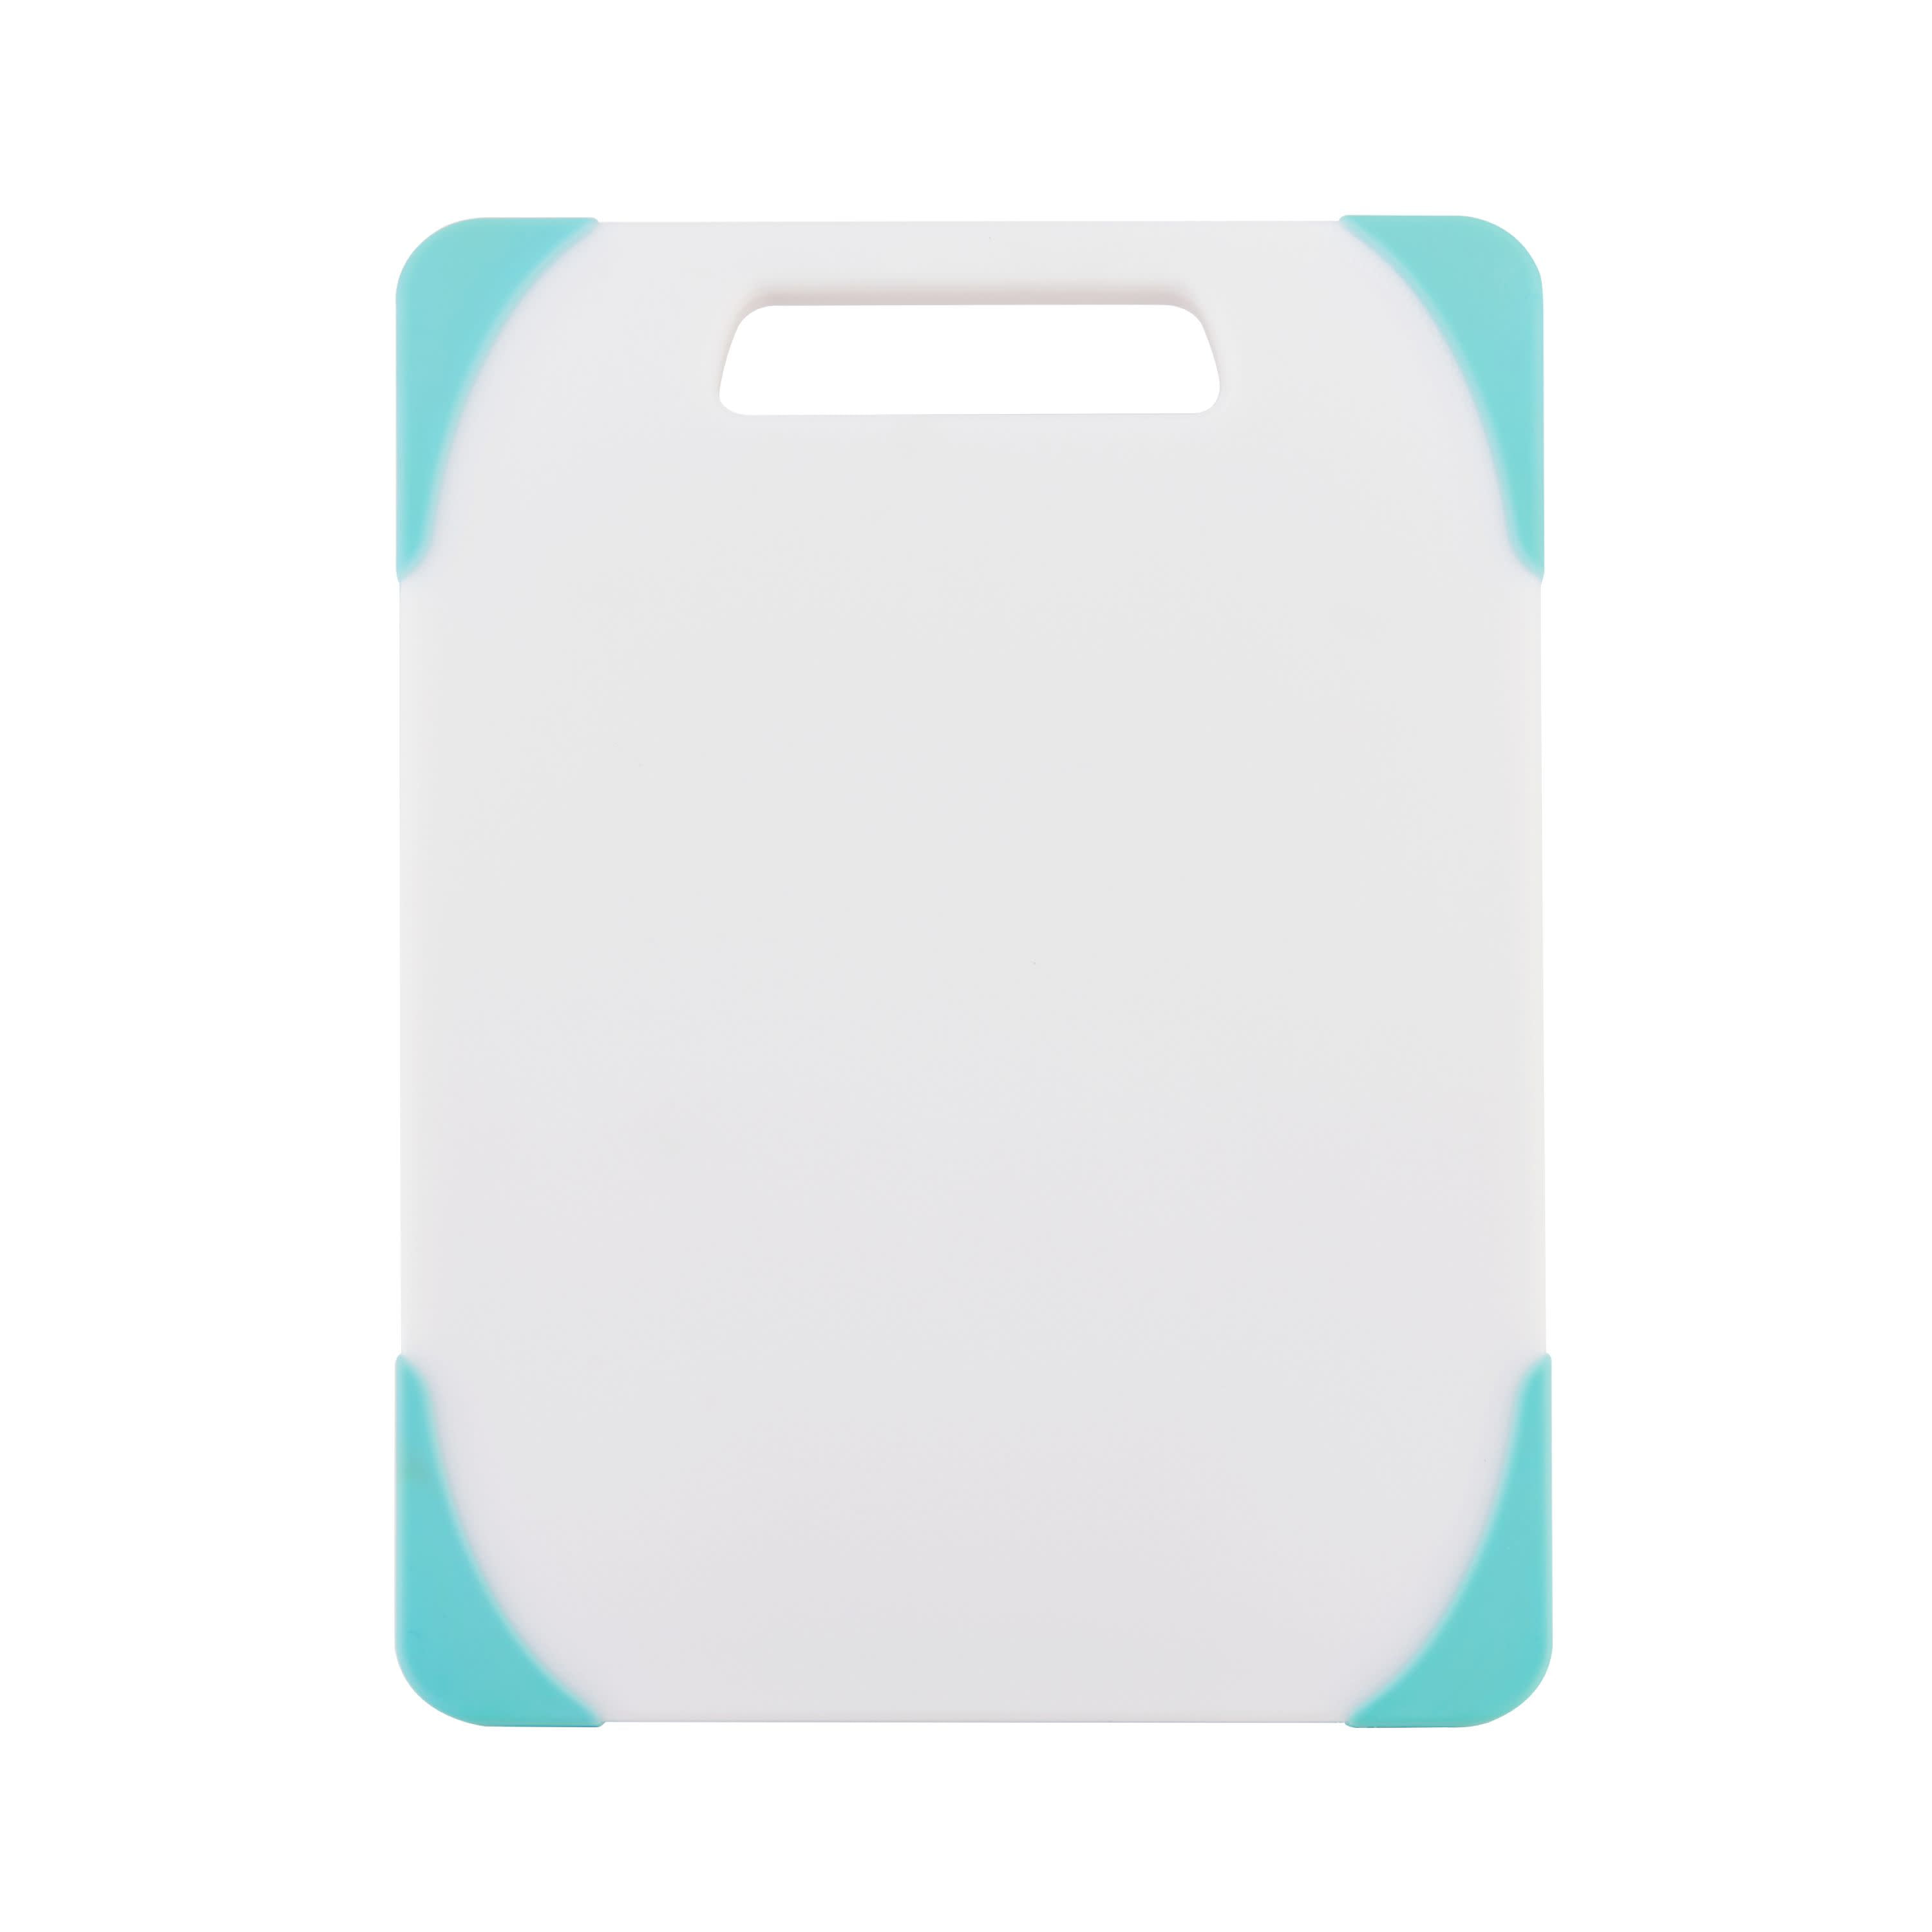 Plastic Cutting Boards for Kitchen (White, 7.75 x 11.75 In, 2 Pack)